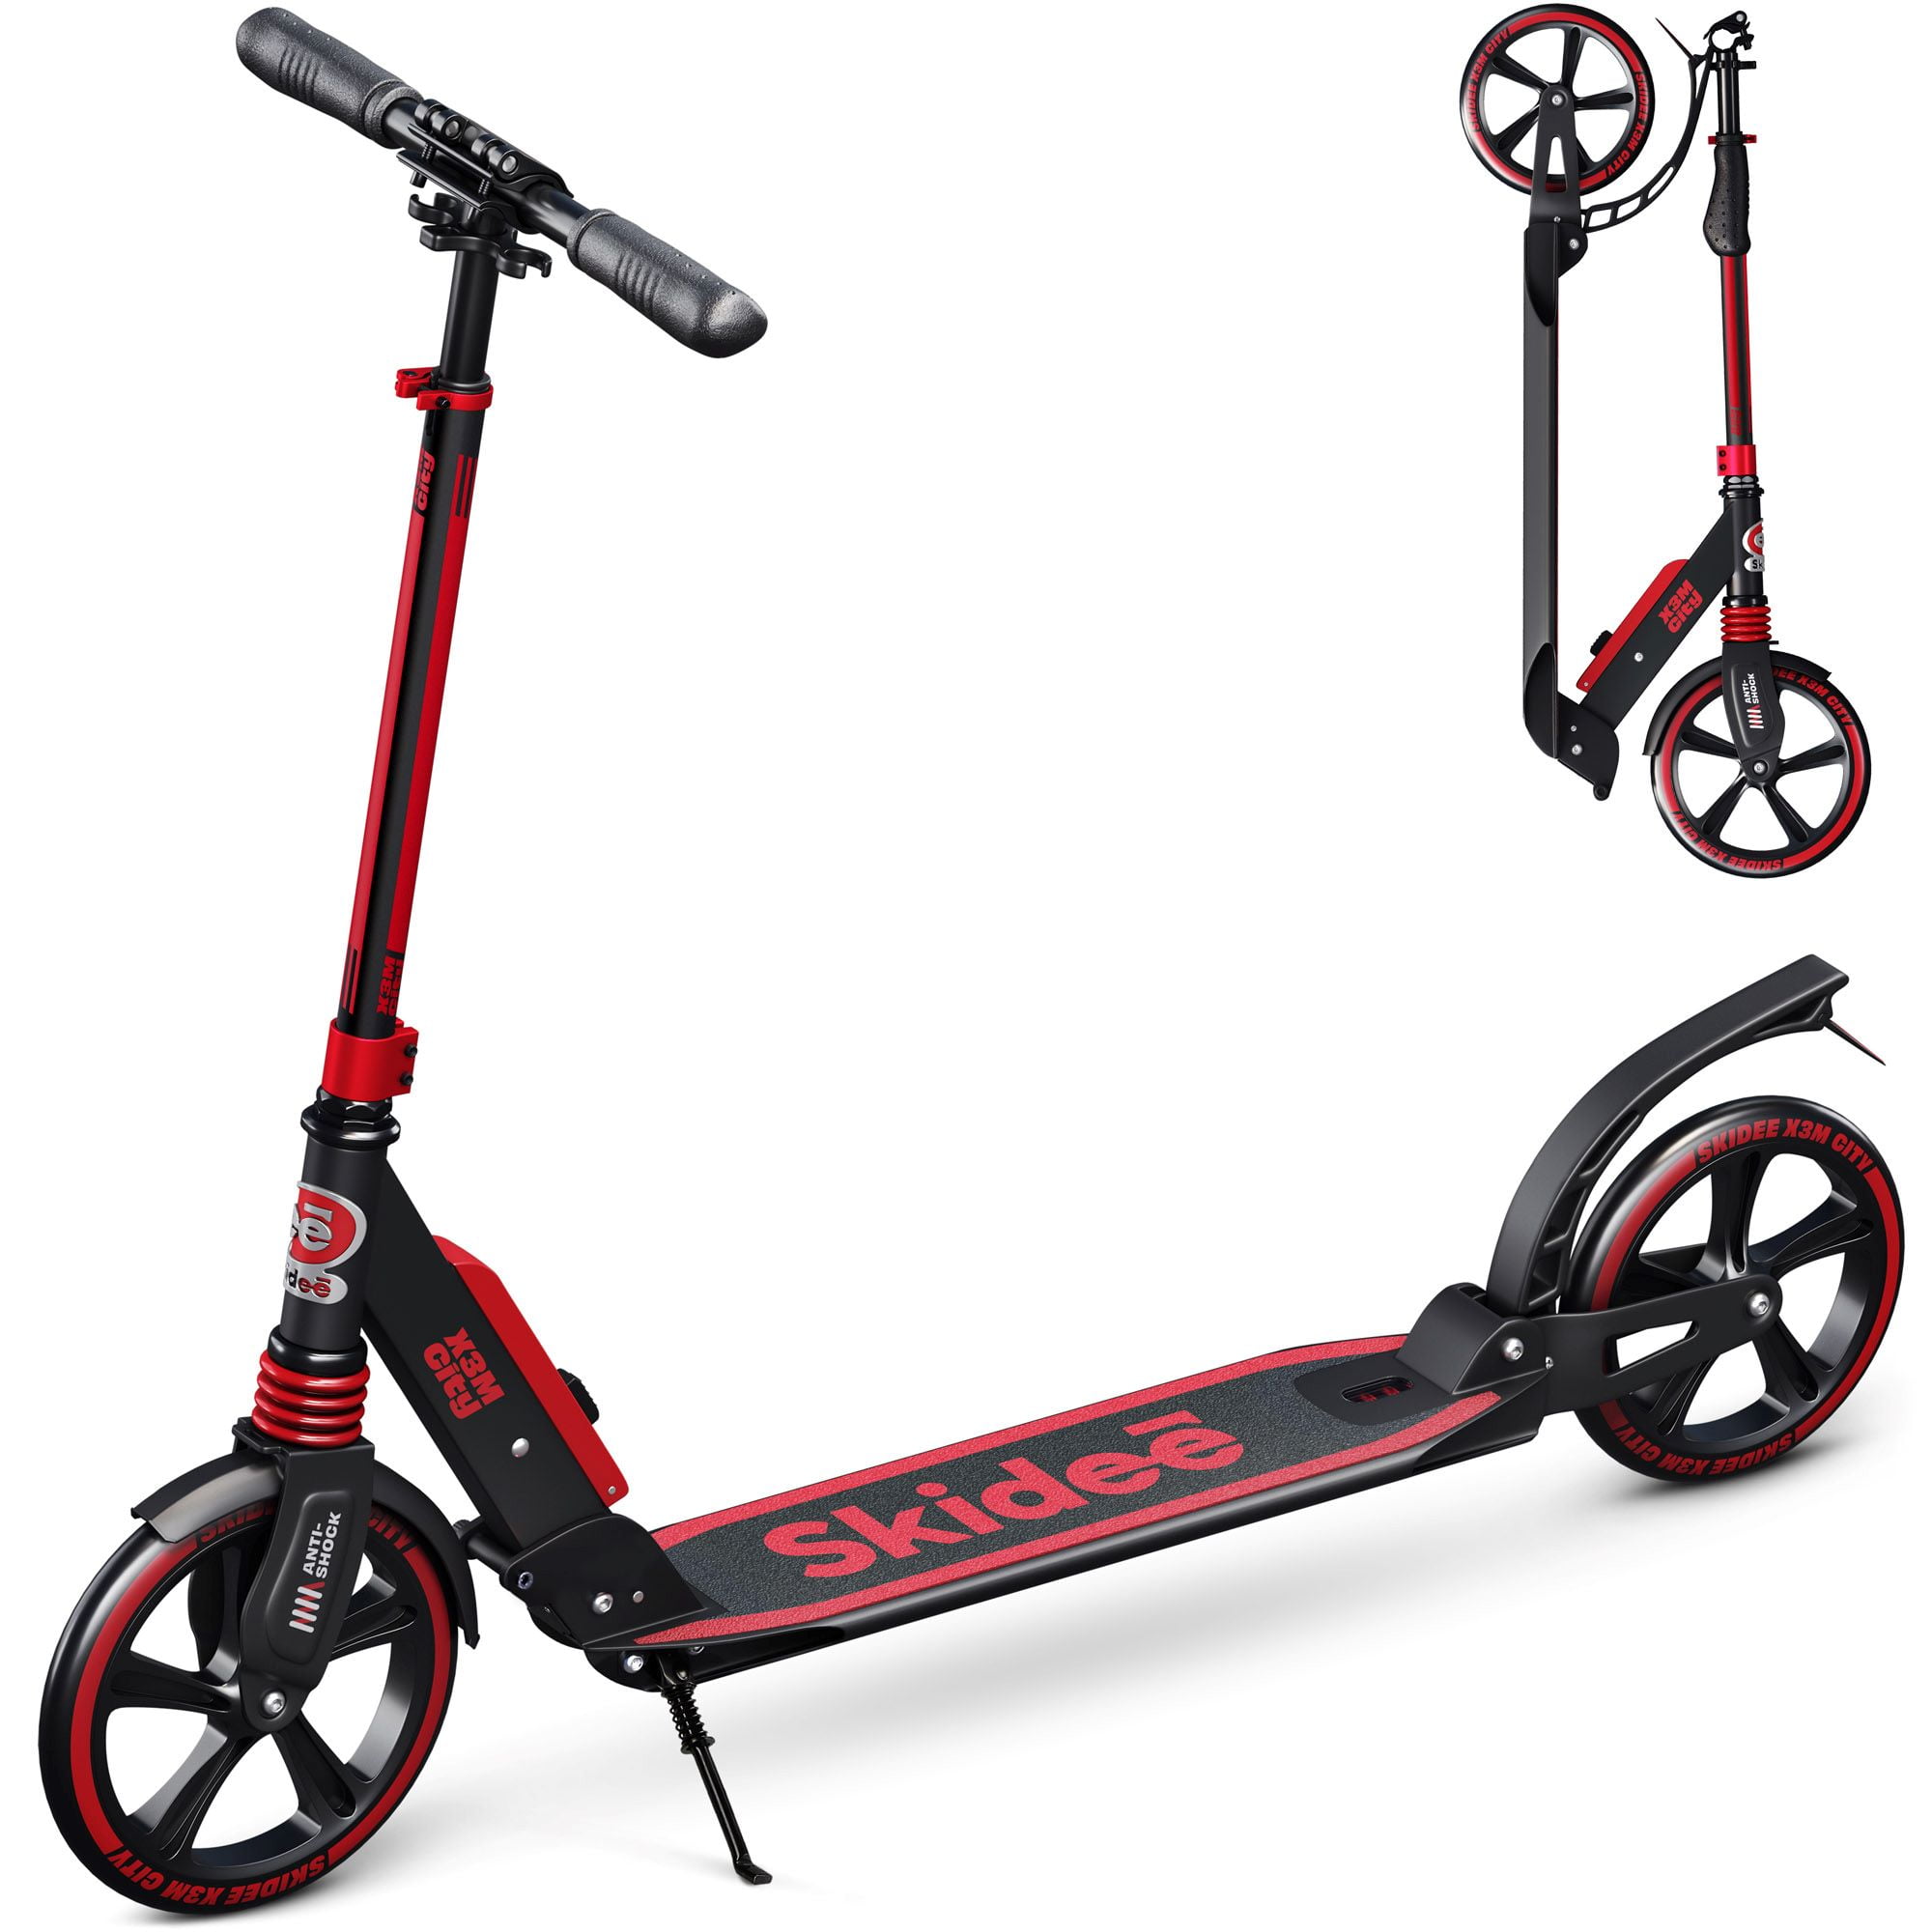 Skidee Scooter for Kids, Teens, Adults, 4 Adjustment Levels 